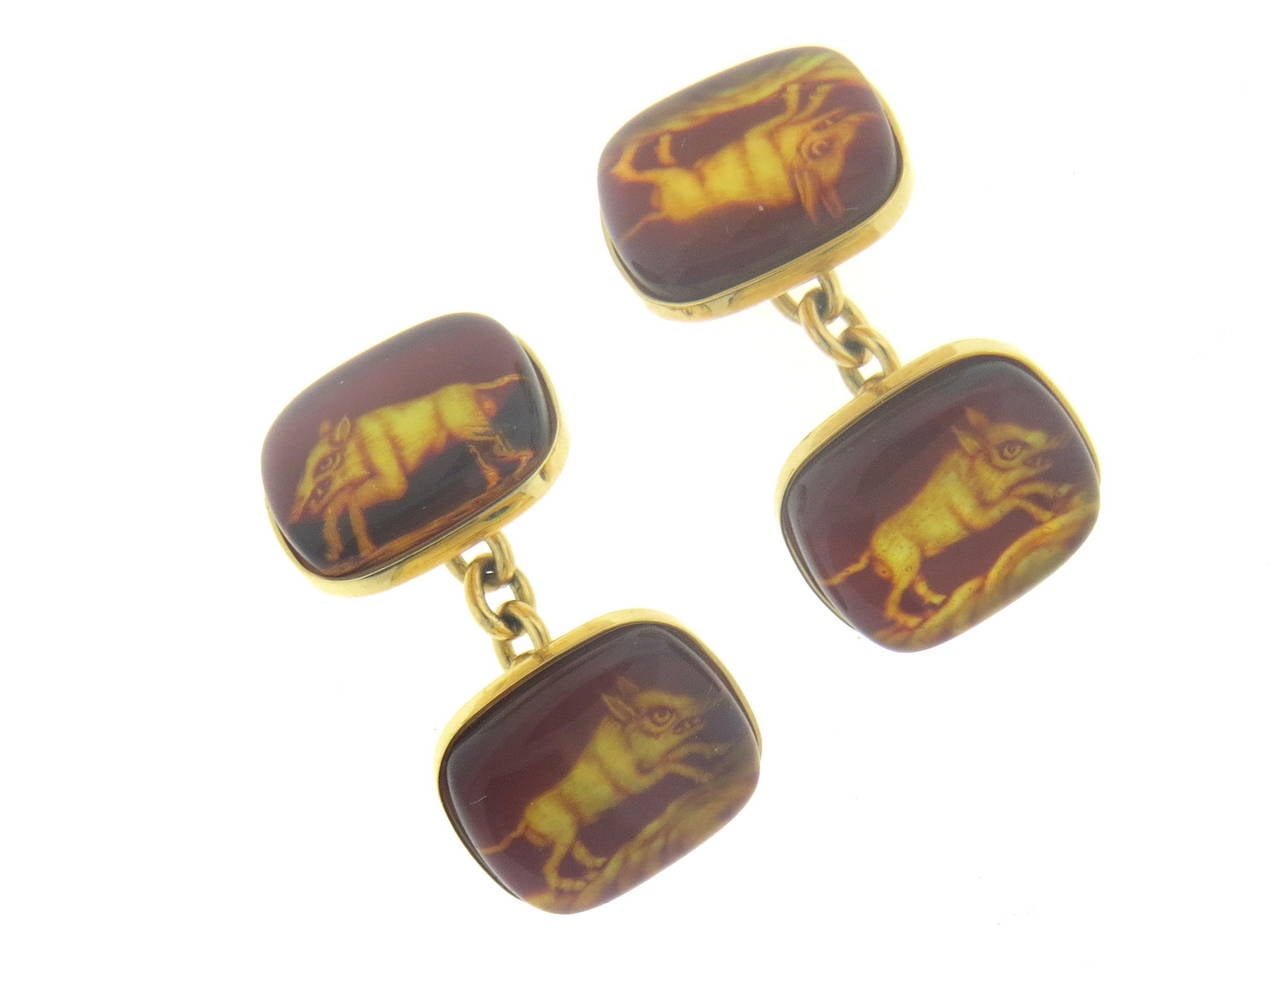 Pair of new 18k yellow gold cufflinks, crafted by Trianon, featuring amber top, depicting wild hog. Each top measures 15mm x 13mm. Marked Trianon, 750. Weight - 9.7 grams
Retail $3000